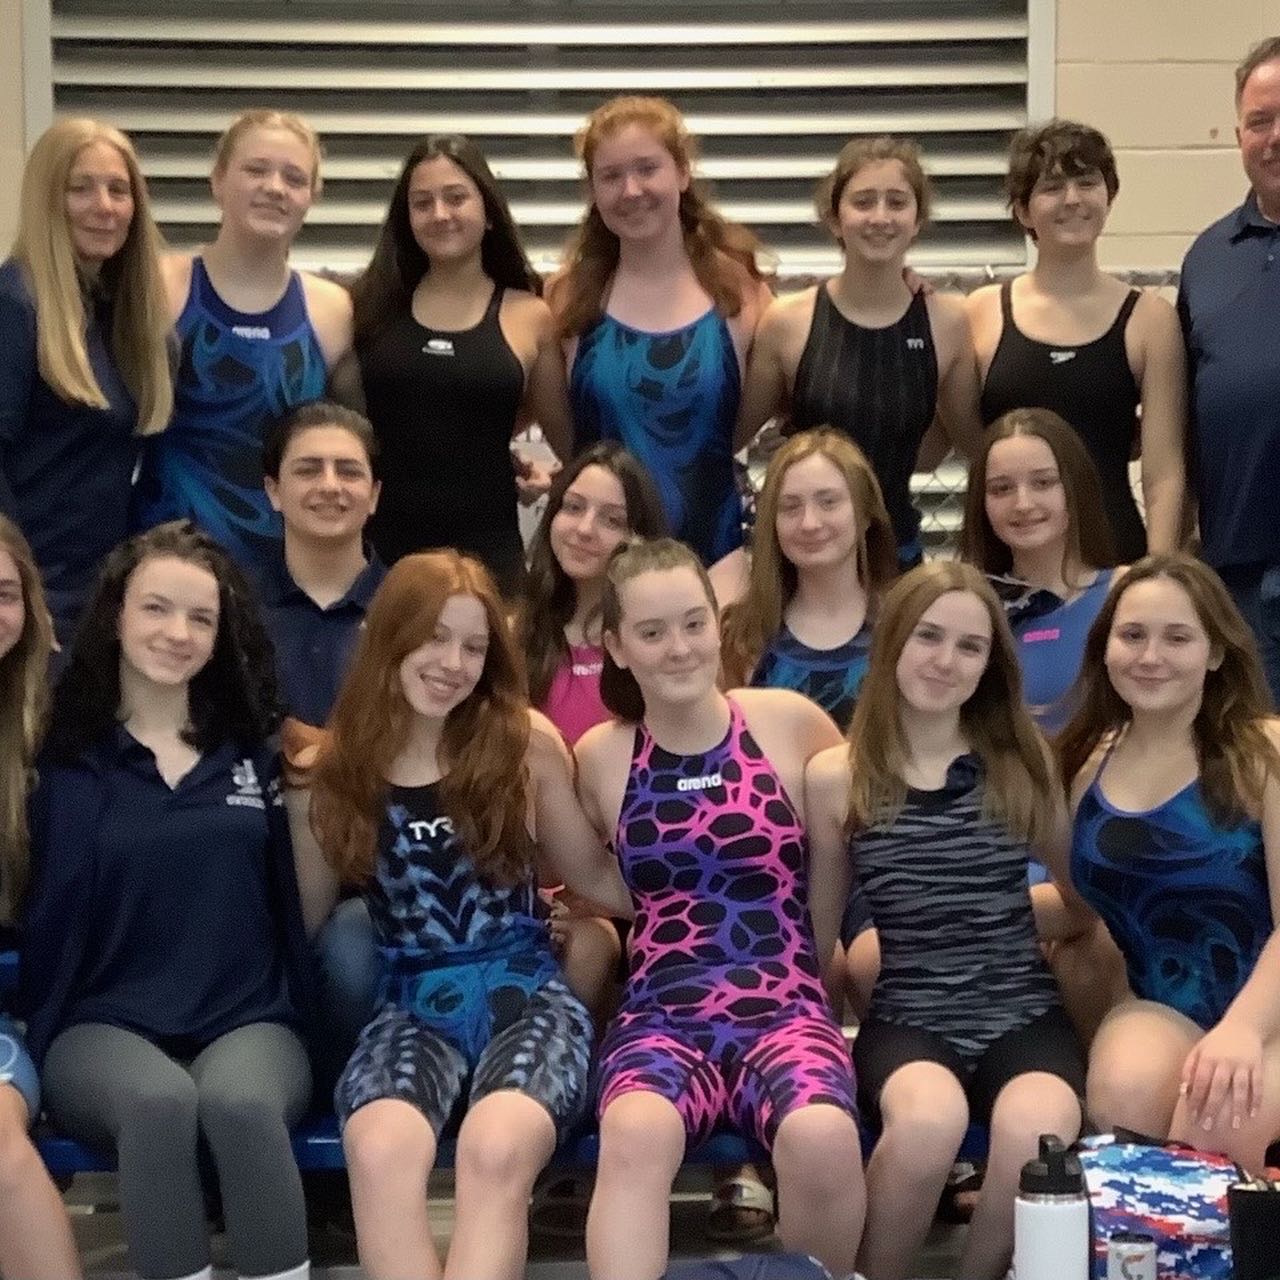 Congratulations to the Freedom Aquatics Female Swimmers on their